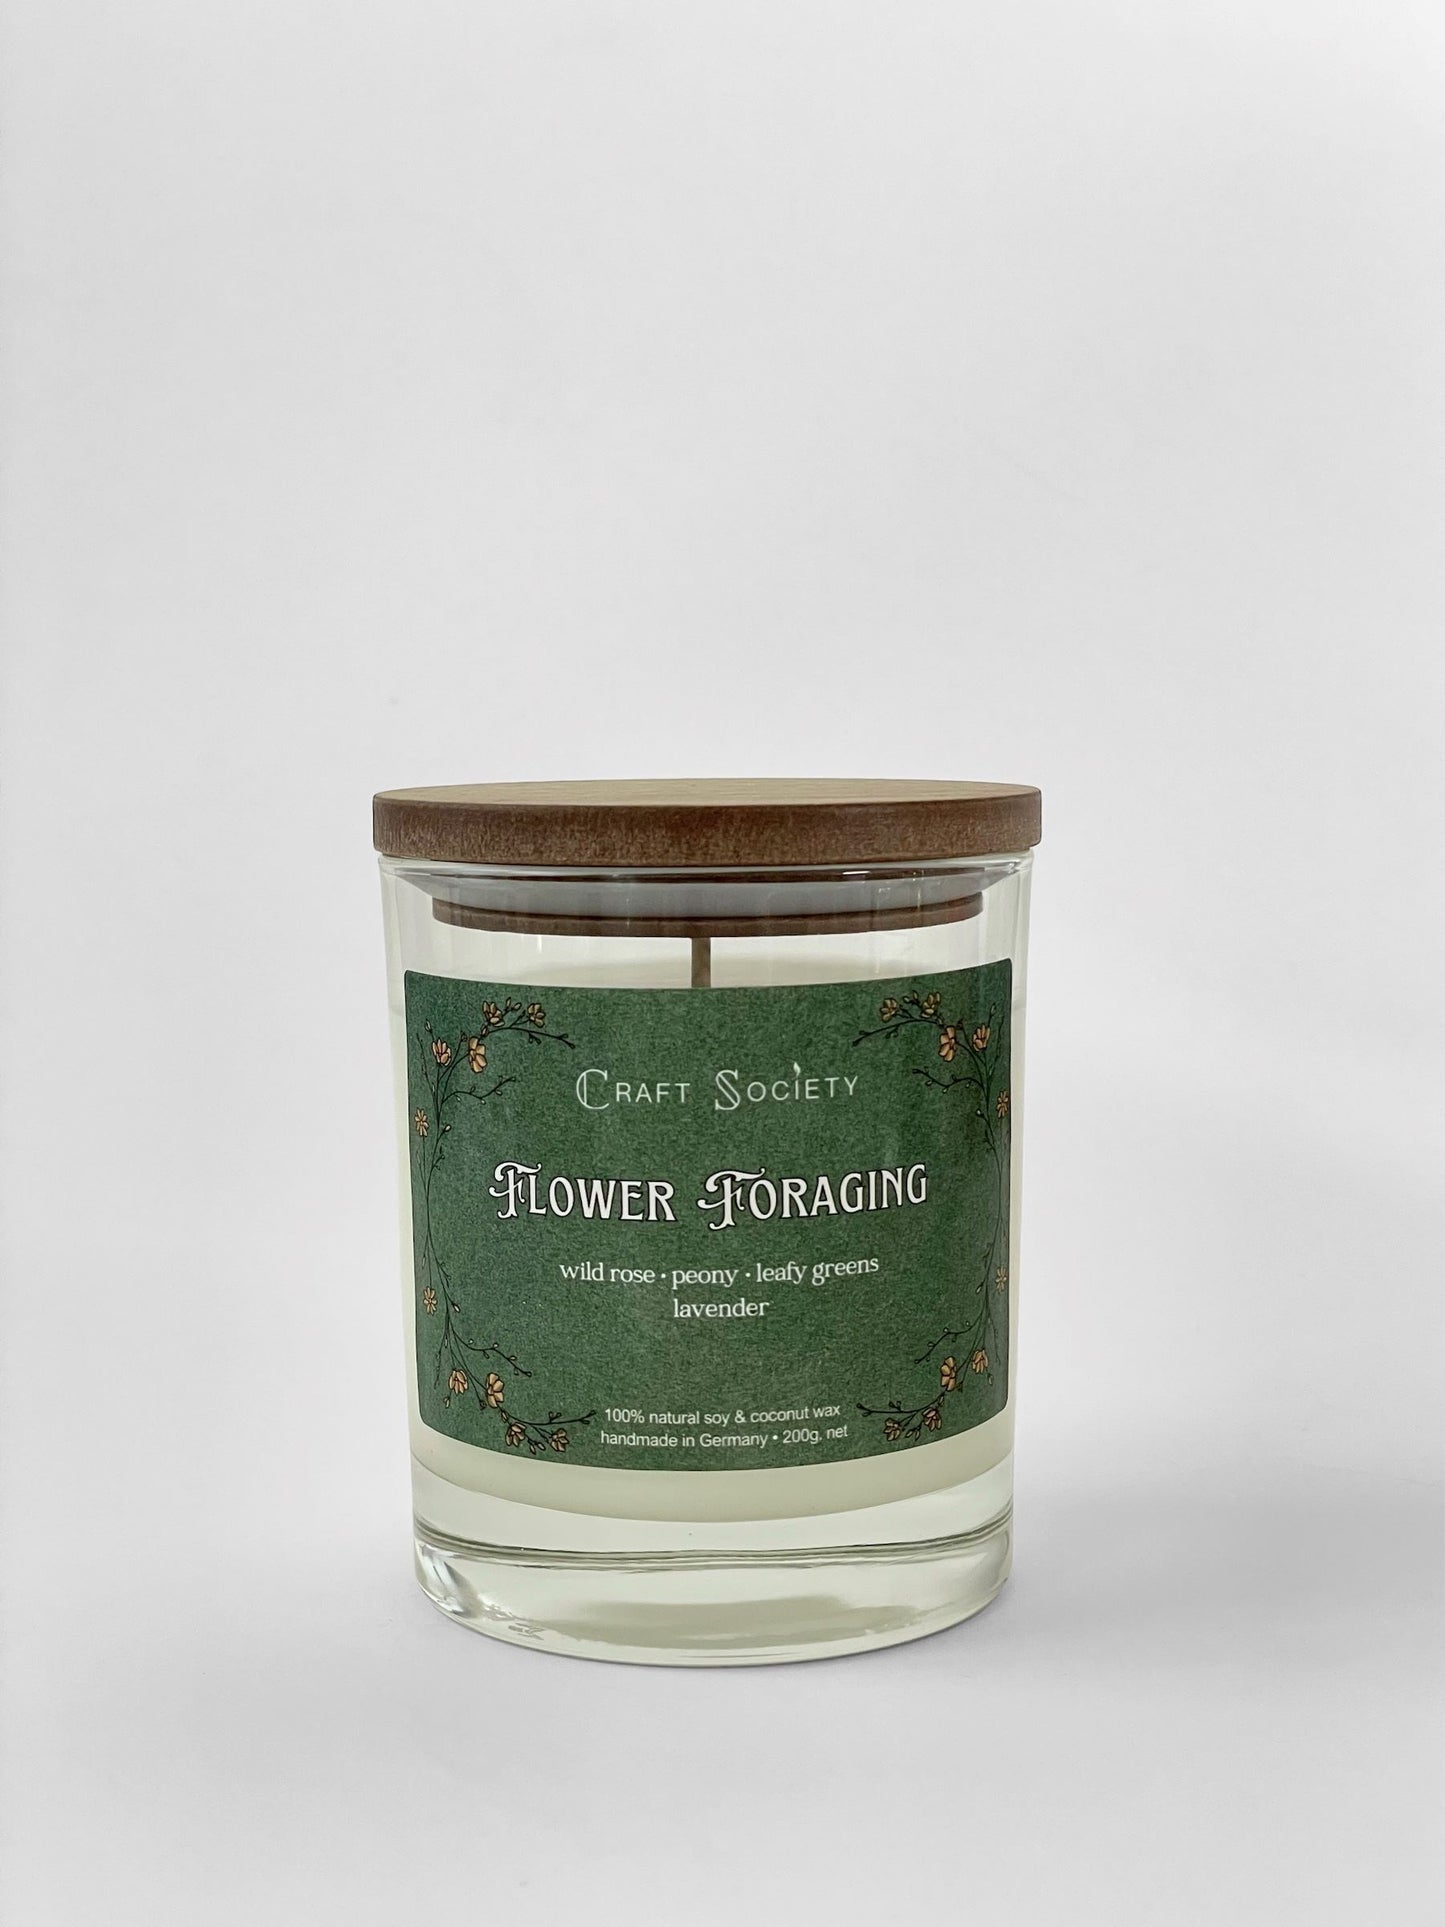 A scented candle called Flower Foraging on a white background, boxed, clear glass jar, regular version with cotton wick